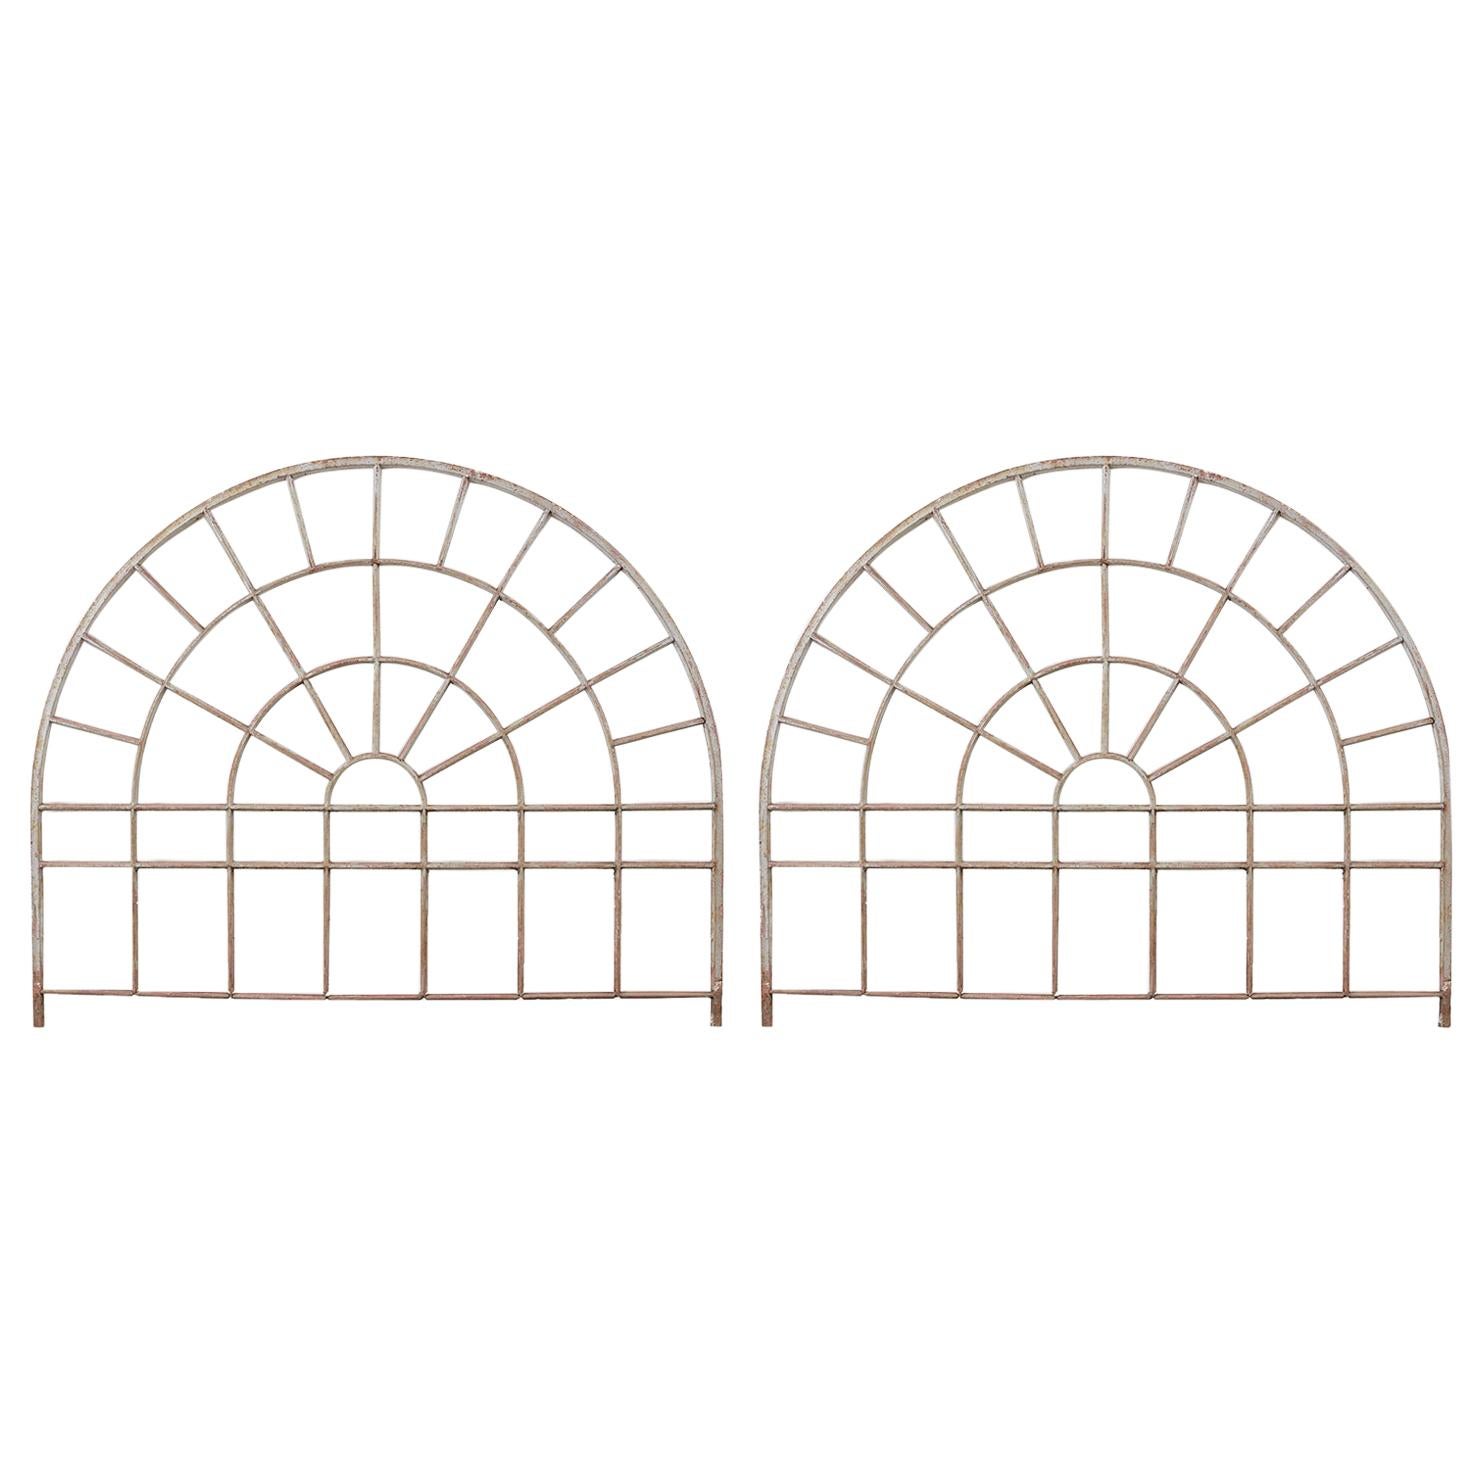 Pair of Industrial Iron Arched Factory Transom Windows